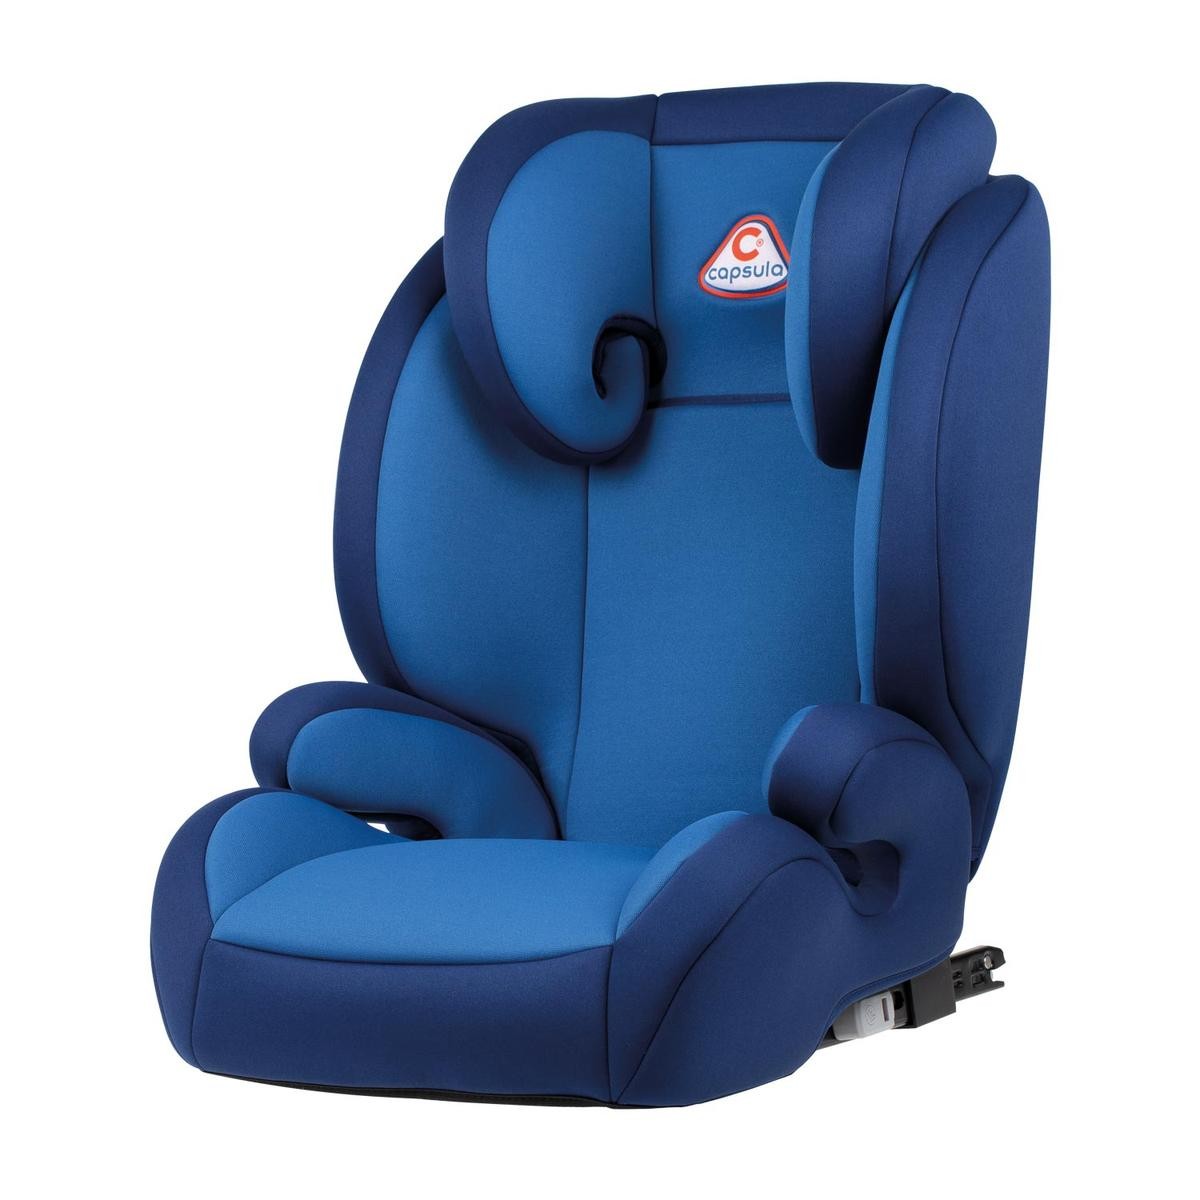 capsula MT5X with Isofix, Group 2/3, 15-36 kg, without seat harness, 620 x 530 x 430, blue, reclining Child weight: 15-36kg, Child seat harness: without seat harness Children's car seat 772140 buy